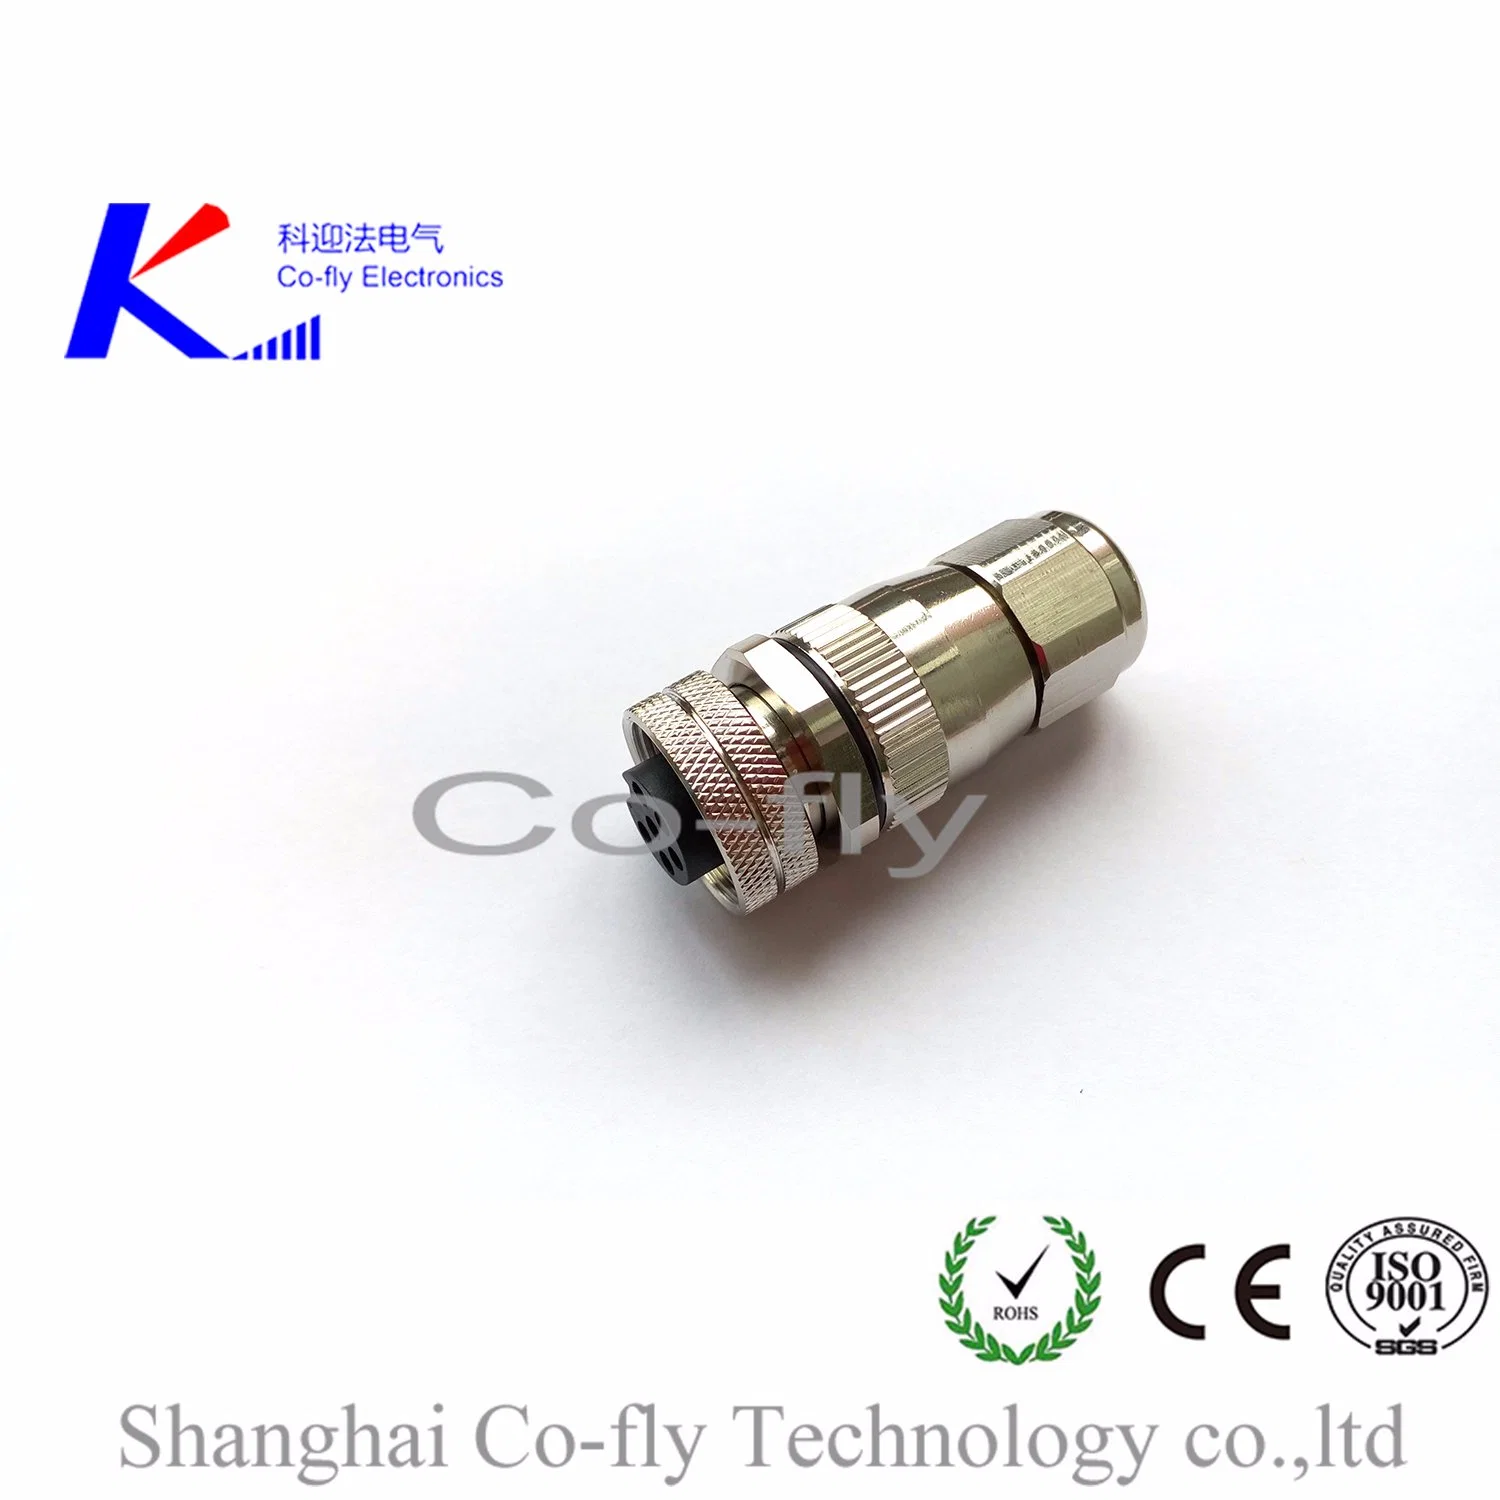 Field Assembly Female Electronic M23 5-Pin Circular Socket Connector